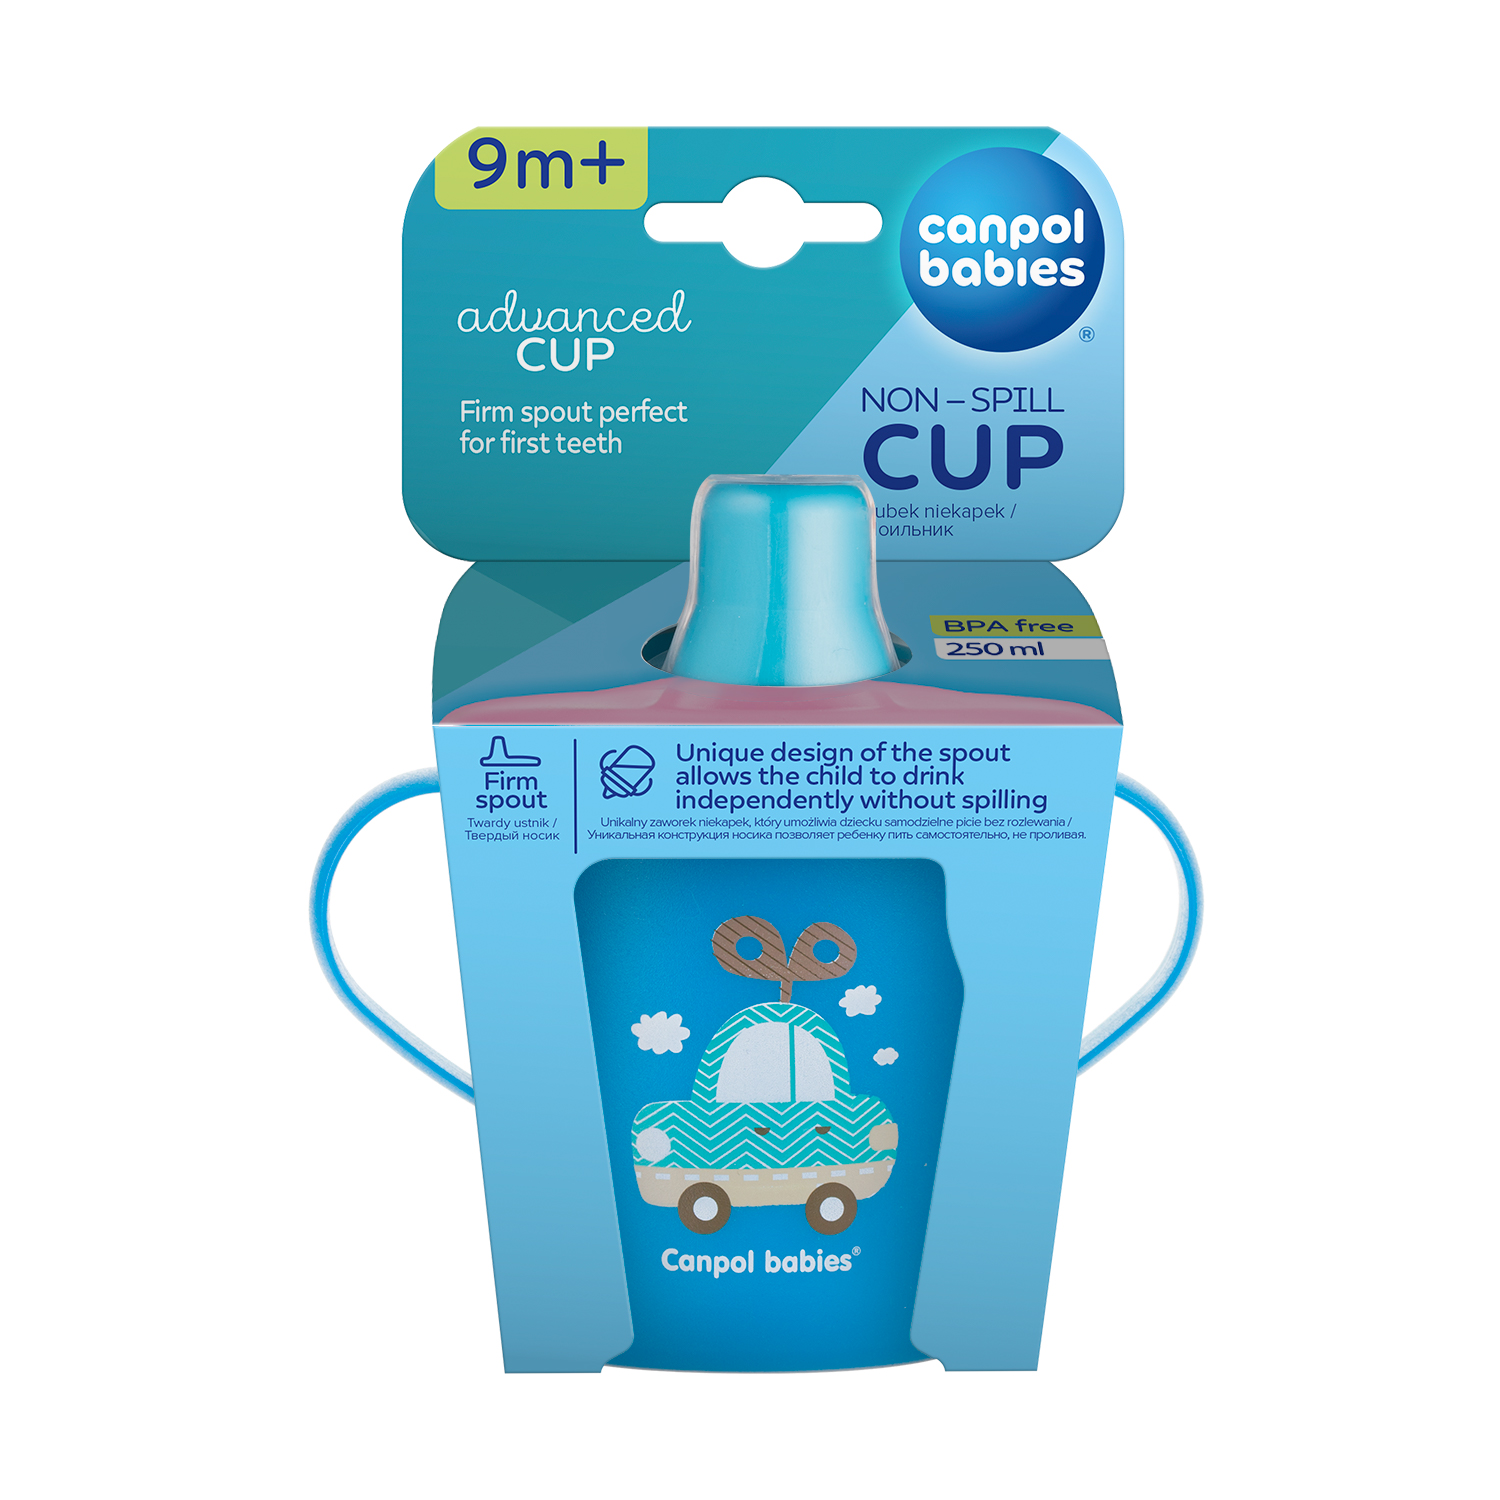 https://canpolbabies.com/eCatalog/canpol/eating-and-drinking/cups-and-sport-cups/31-200_blu/31_200_blu-pack-front.jpg